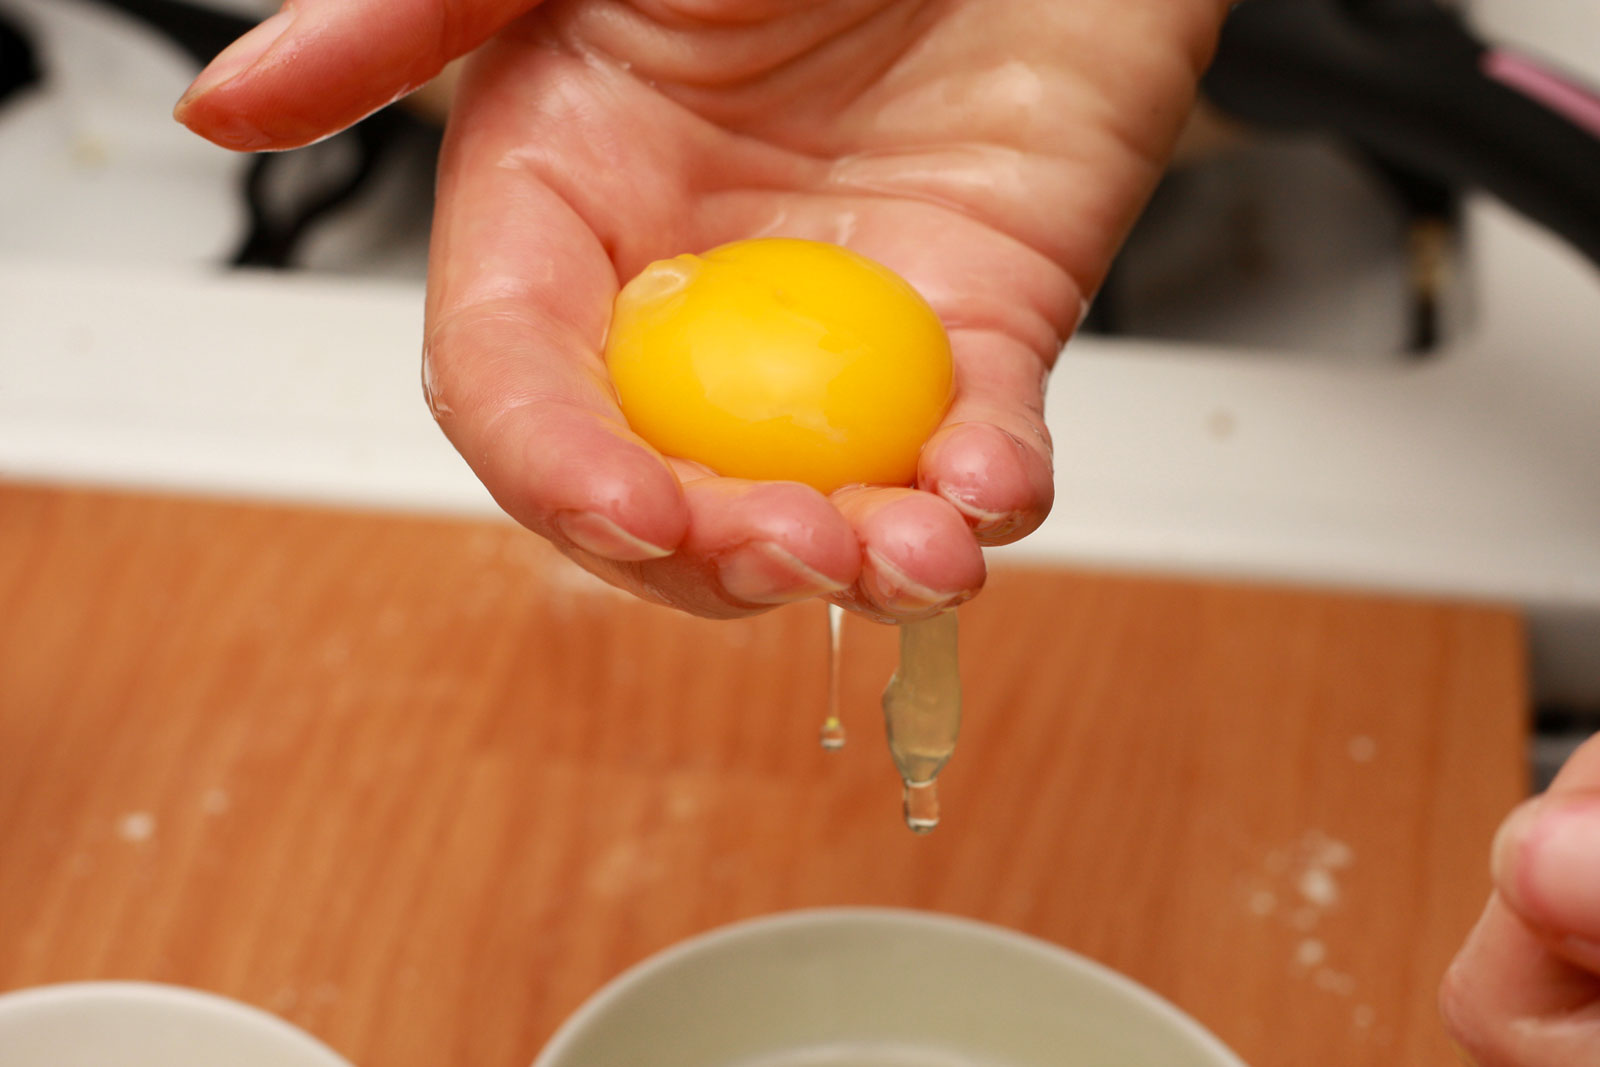 Separating egg yolks from whites by hand